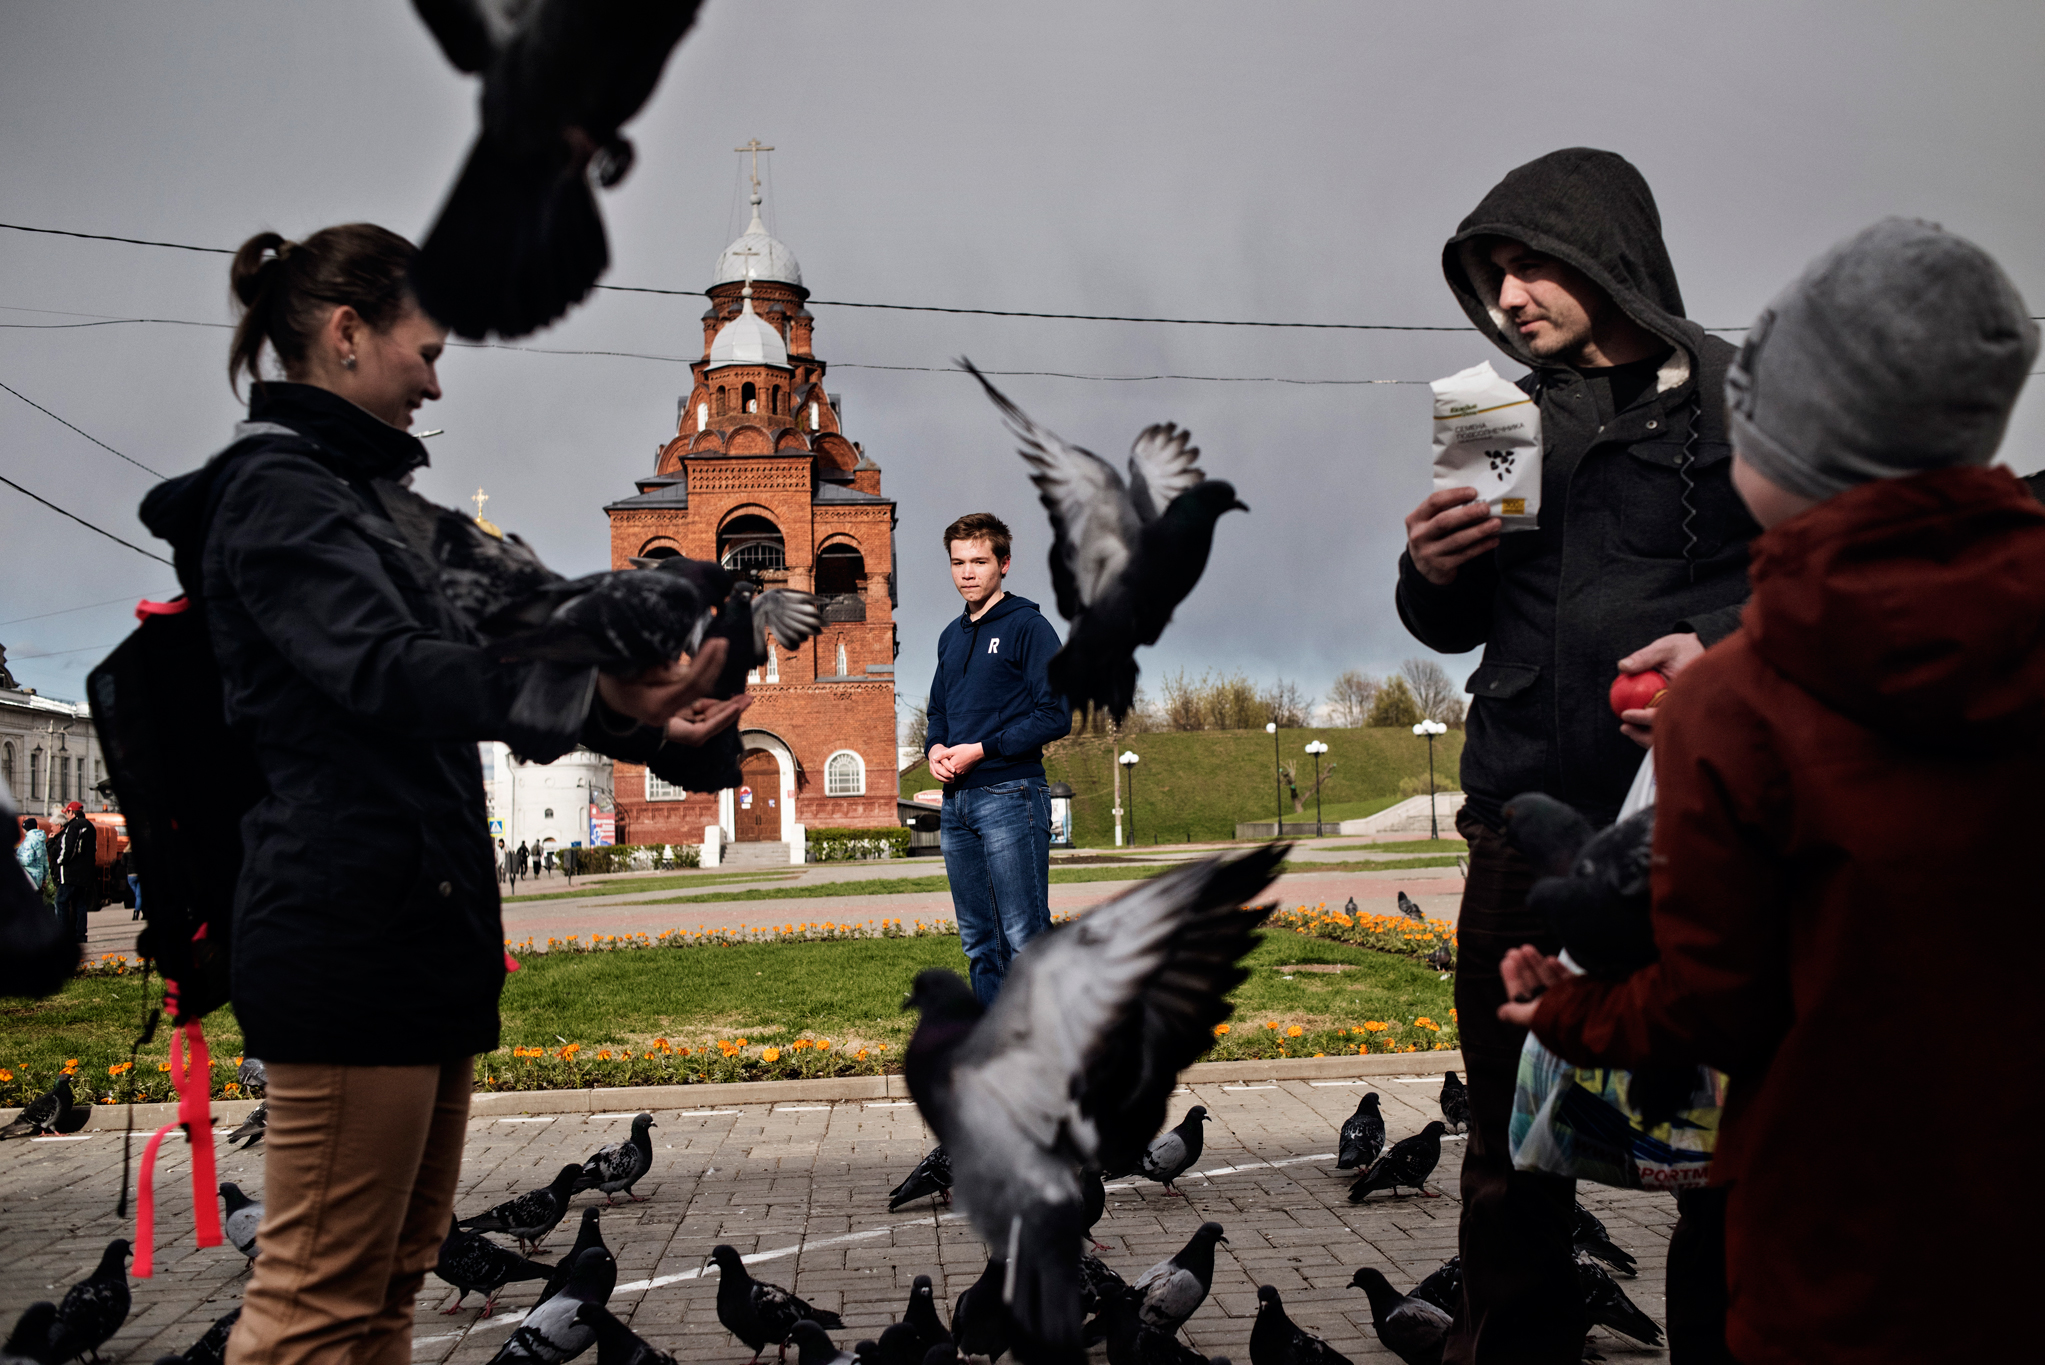 Vladimir Russia May 12 2017 Mikhail Ogorodnikov, 16, looks at a family feeds pigeons in downtown Vladimir. He said he'd plan to join new protests against prime minister Dmitry Medvedev on June 12.